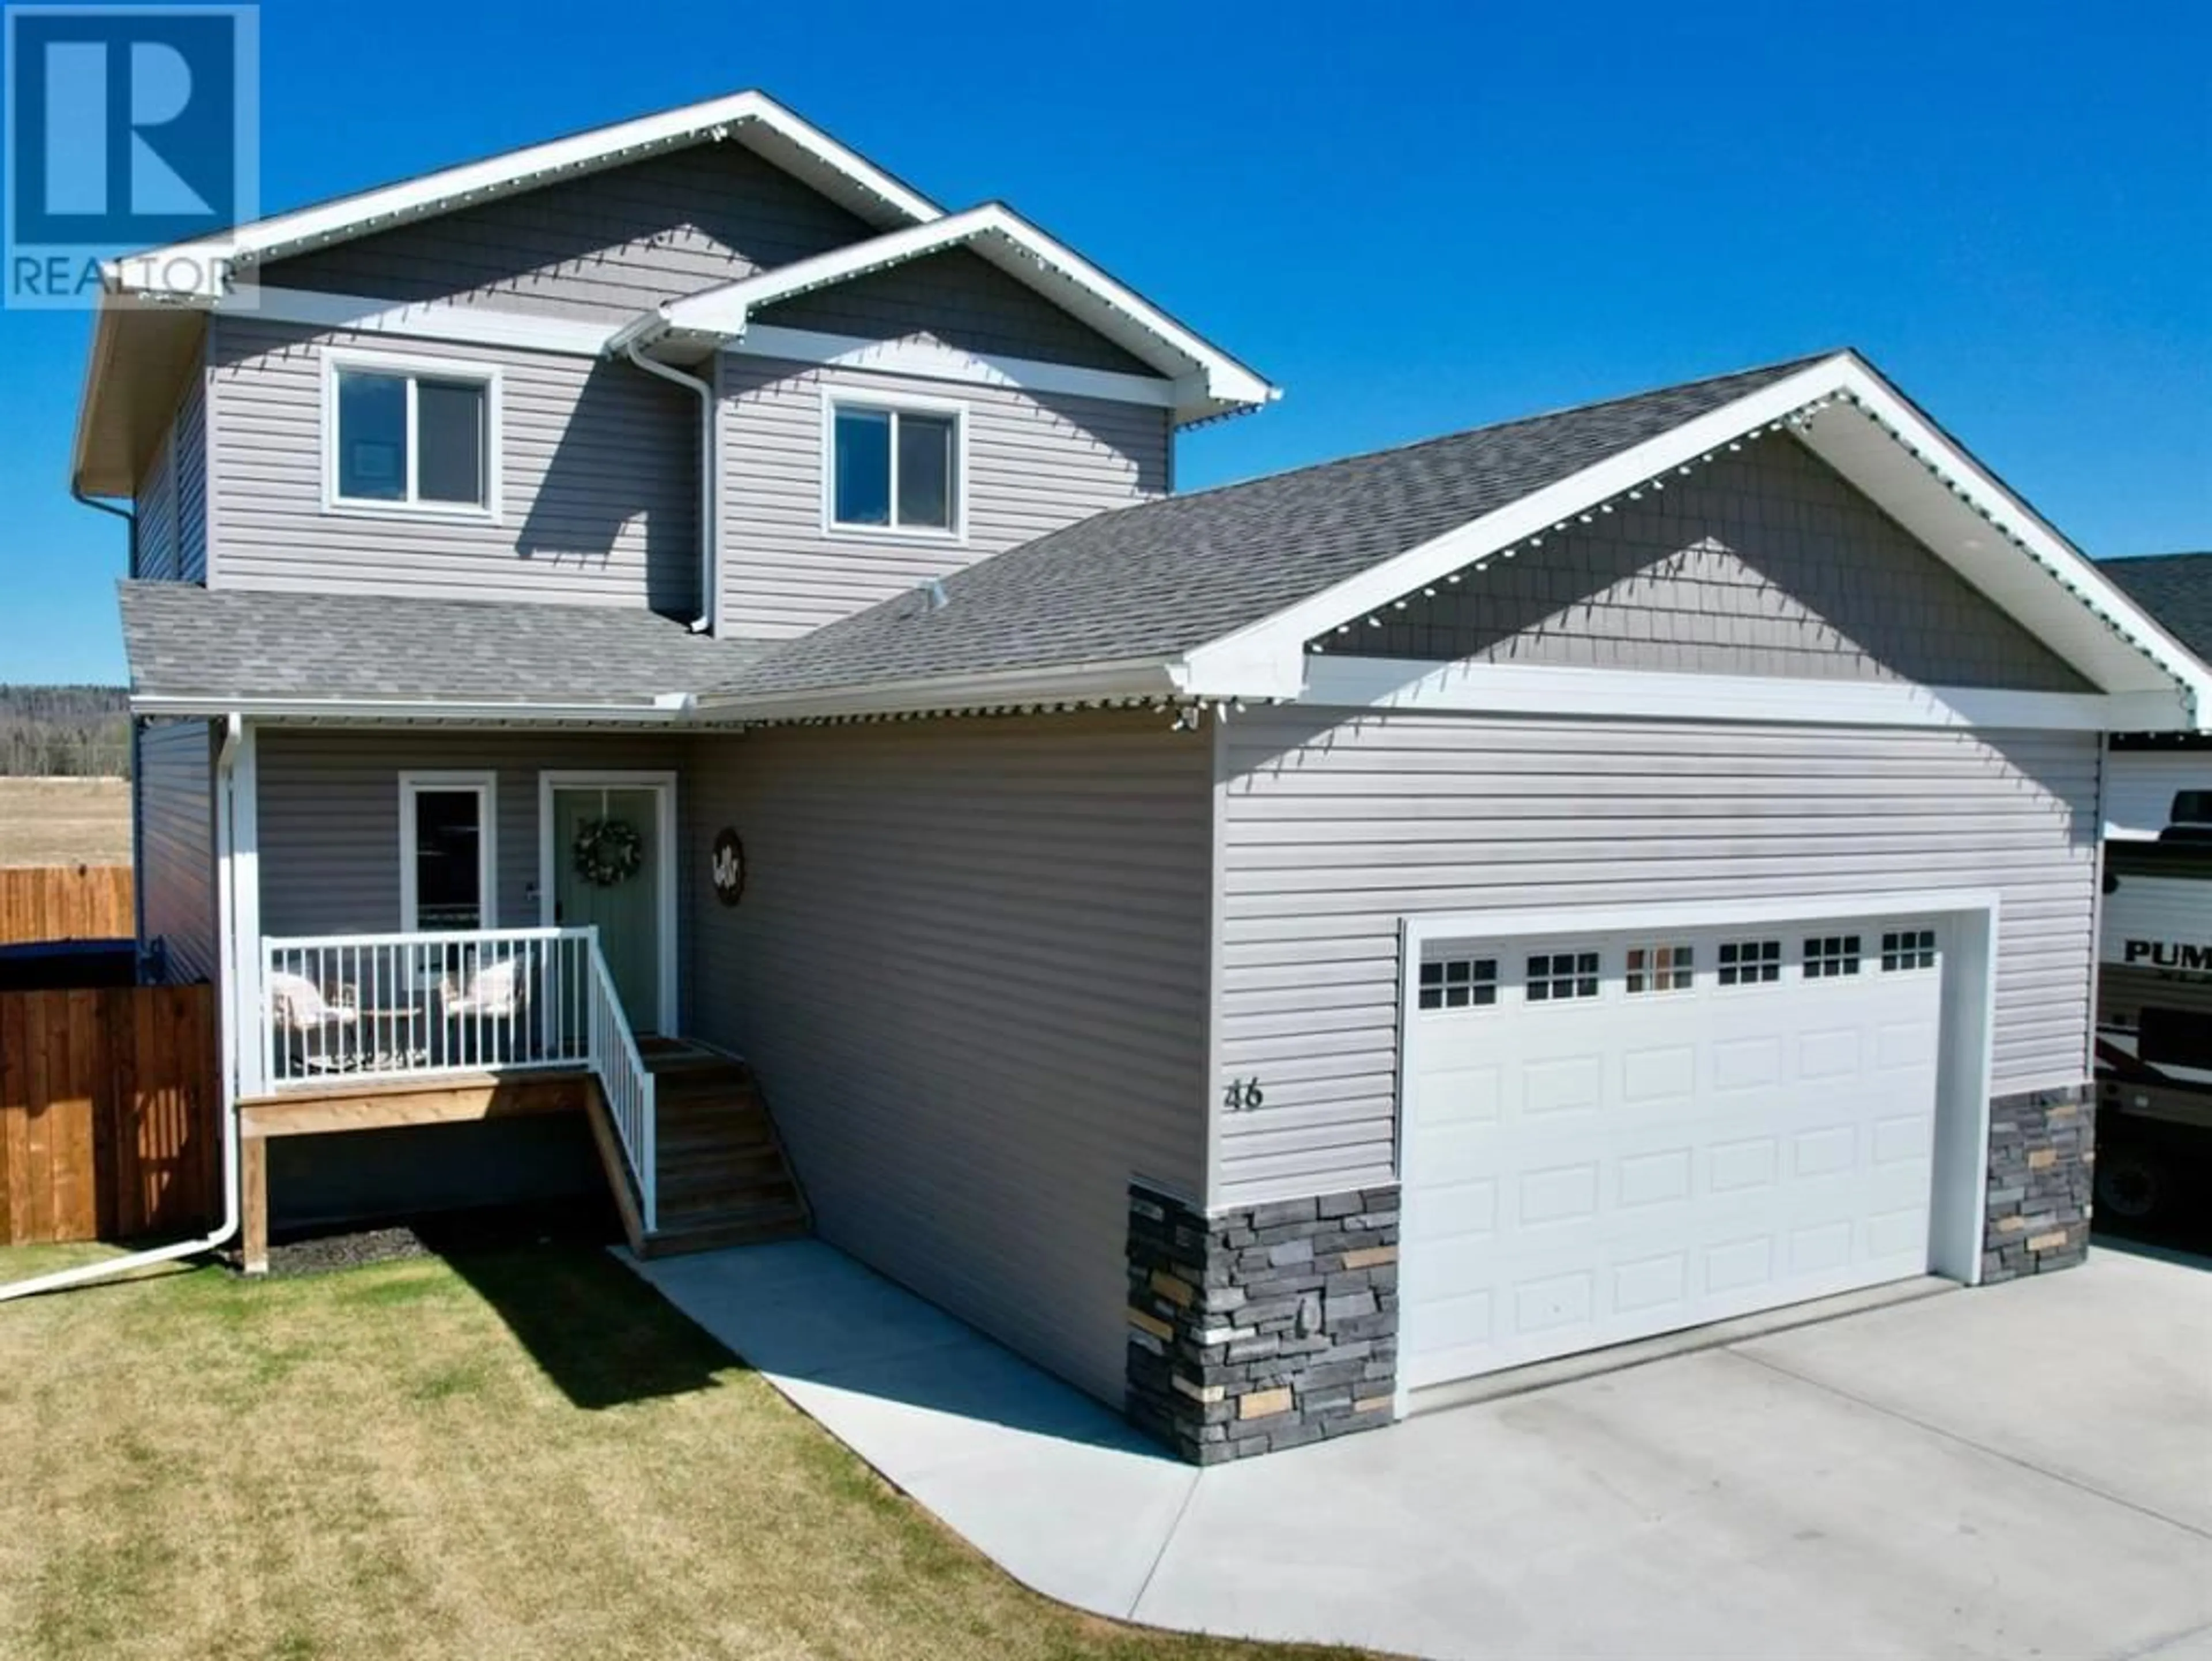 Home with vinyl exterior material for 46 Riverdale Bend, Whitecourt Alberta T7S0G4